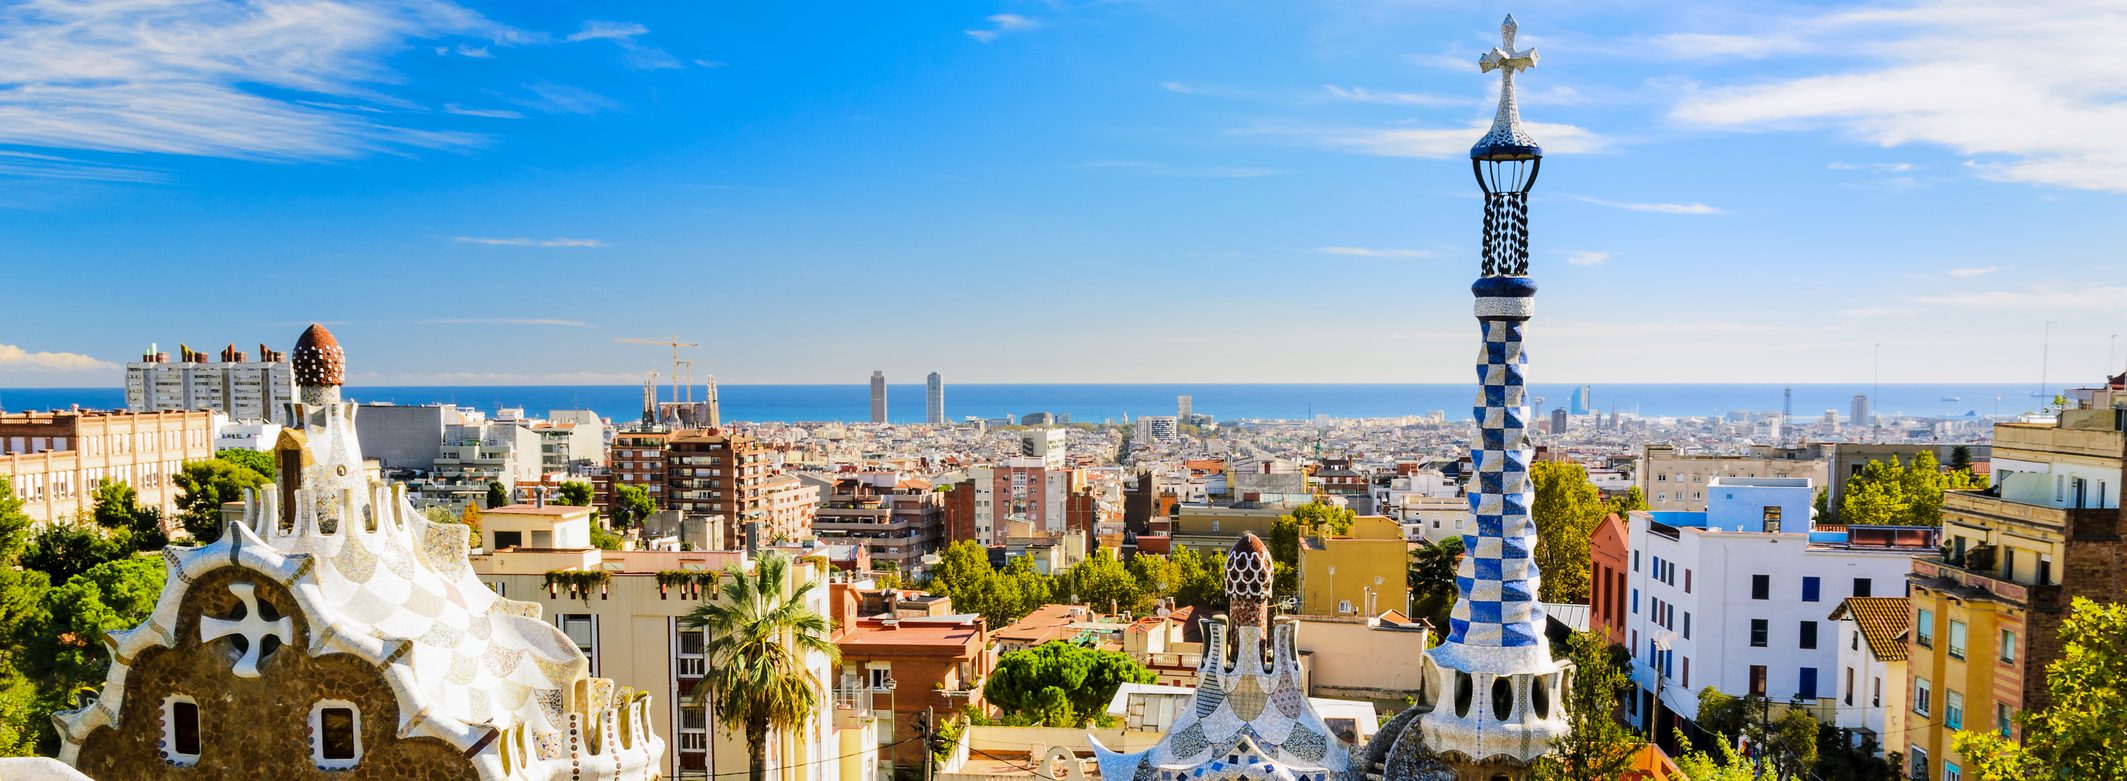 6-night Paris & Barcelona escape with air & hotels from $716